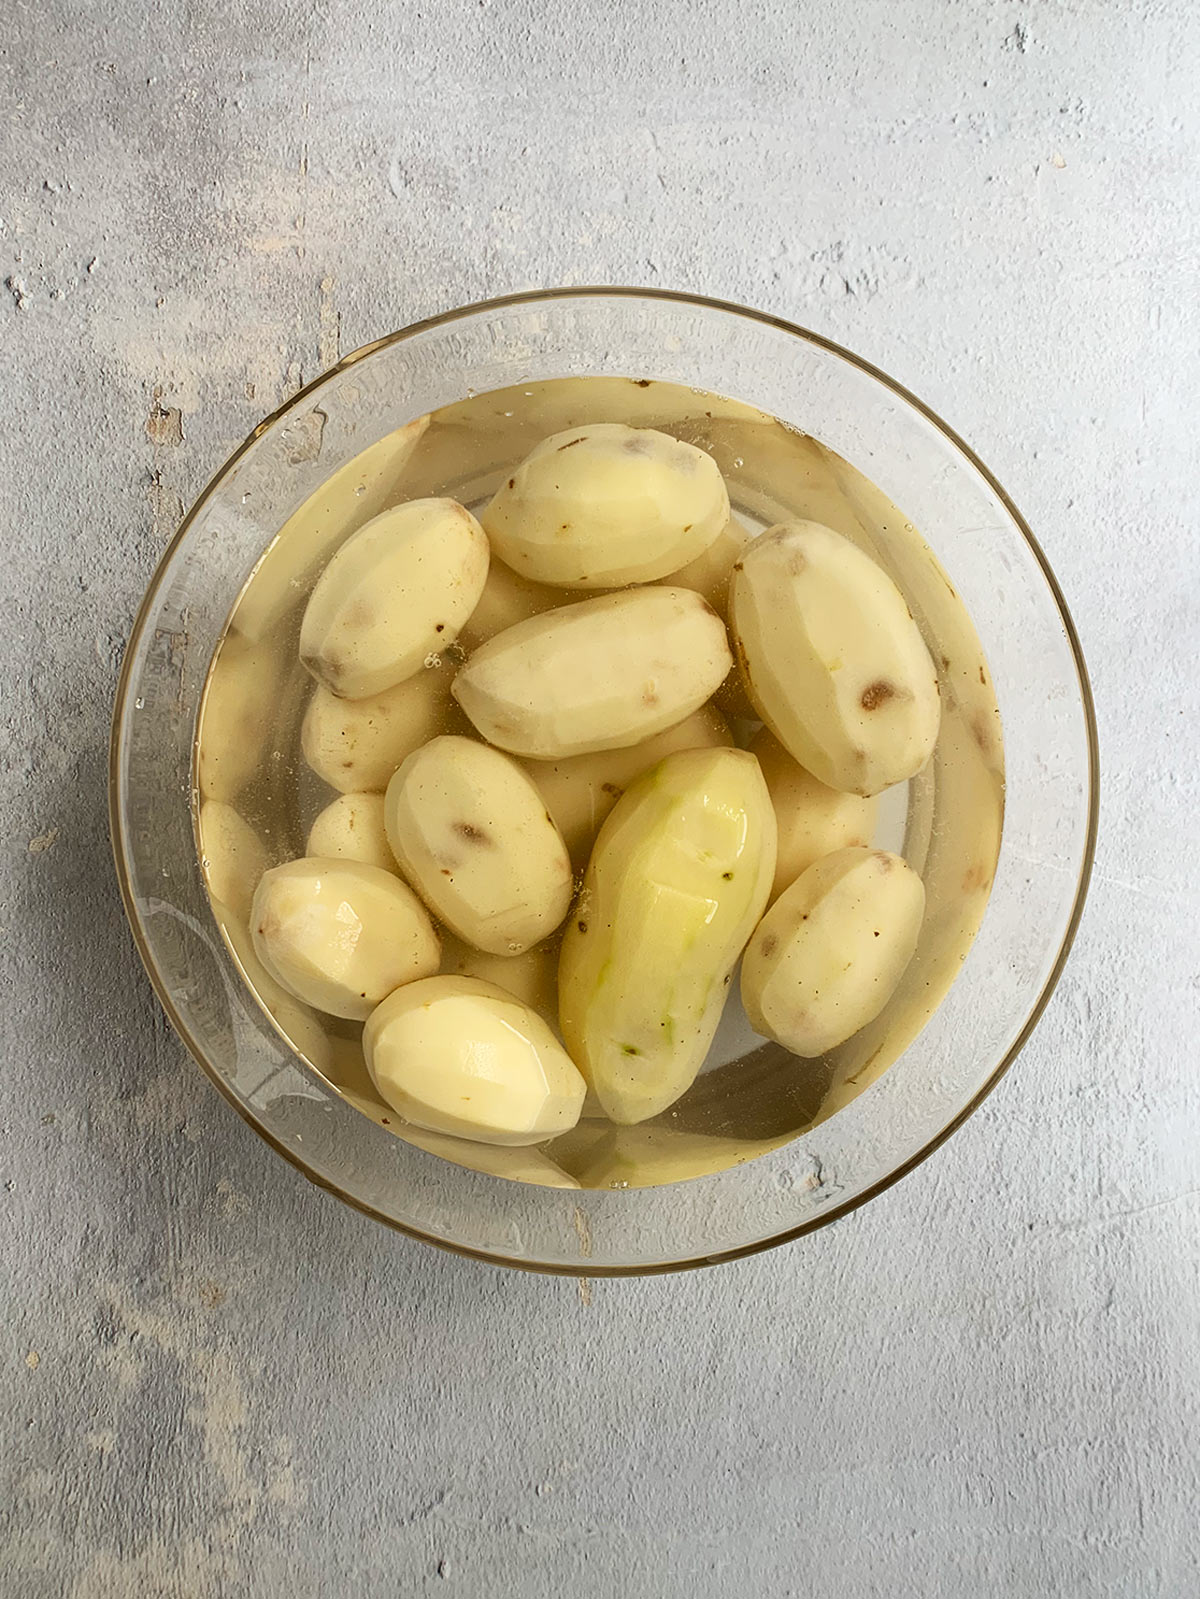 Peeled potatoes in a clear bowl in water.